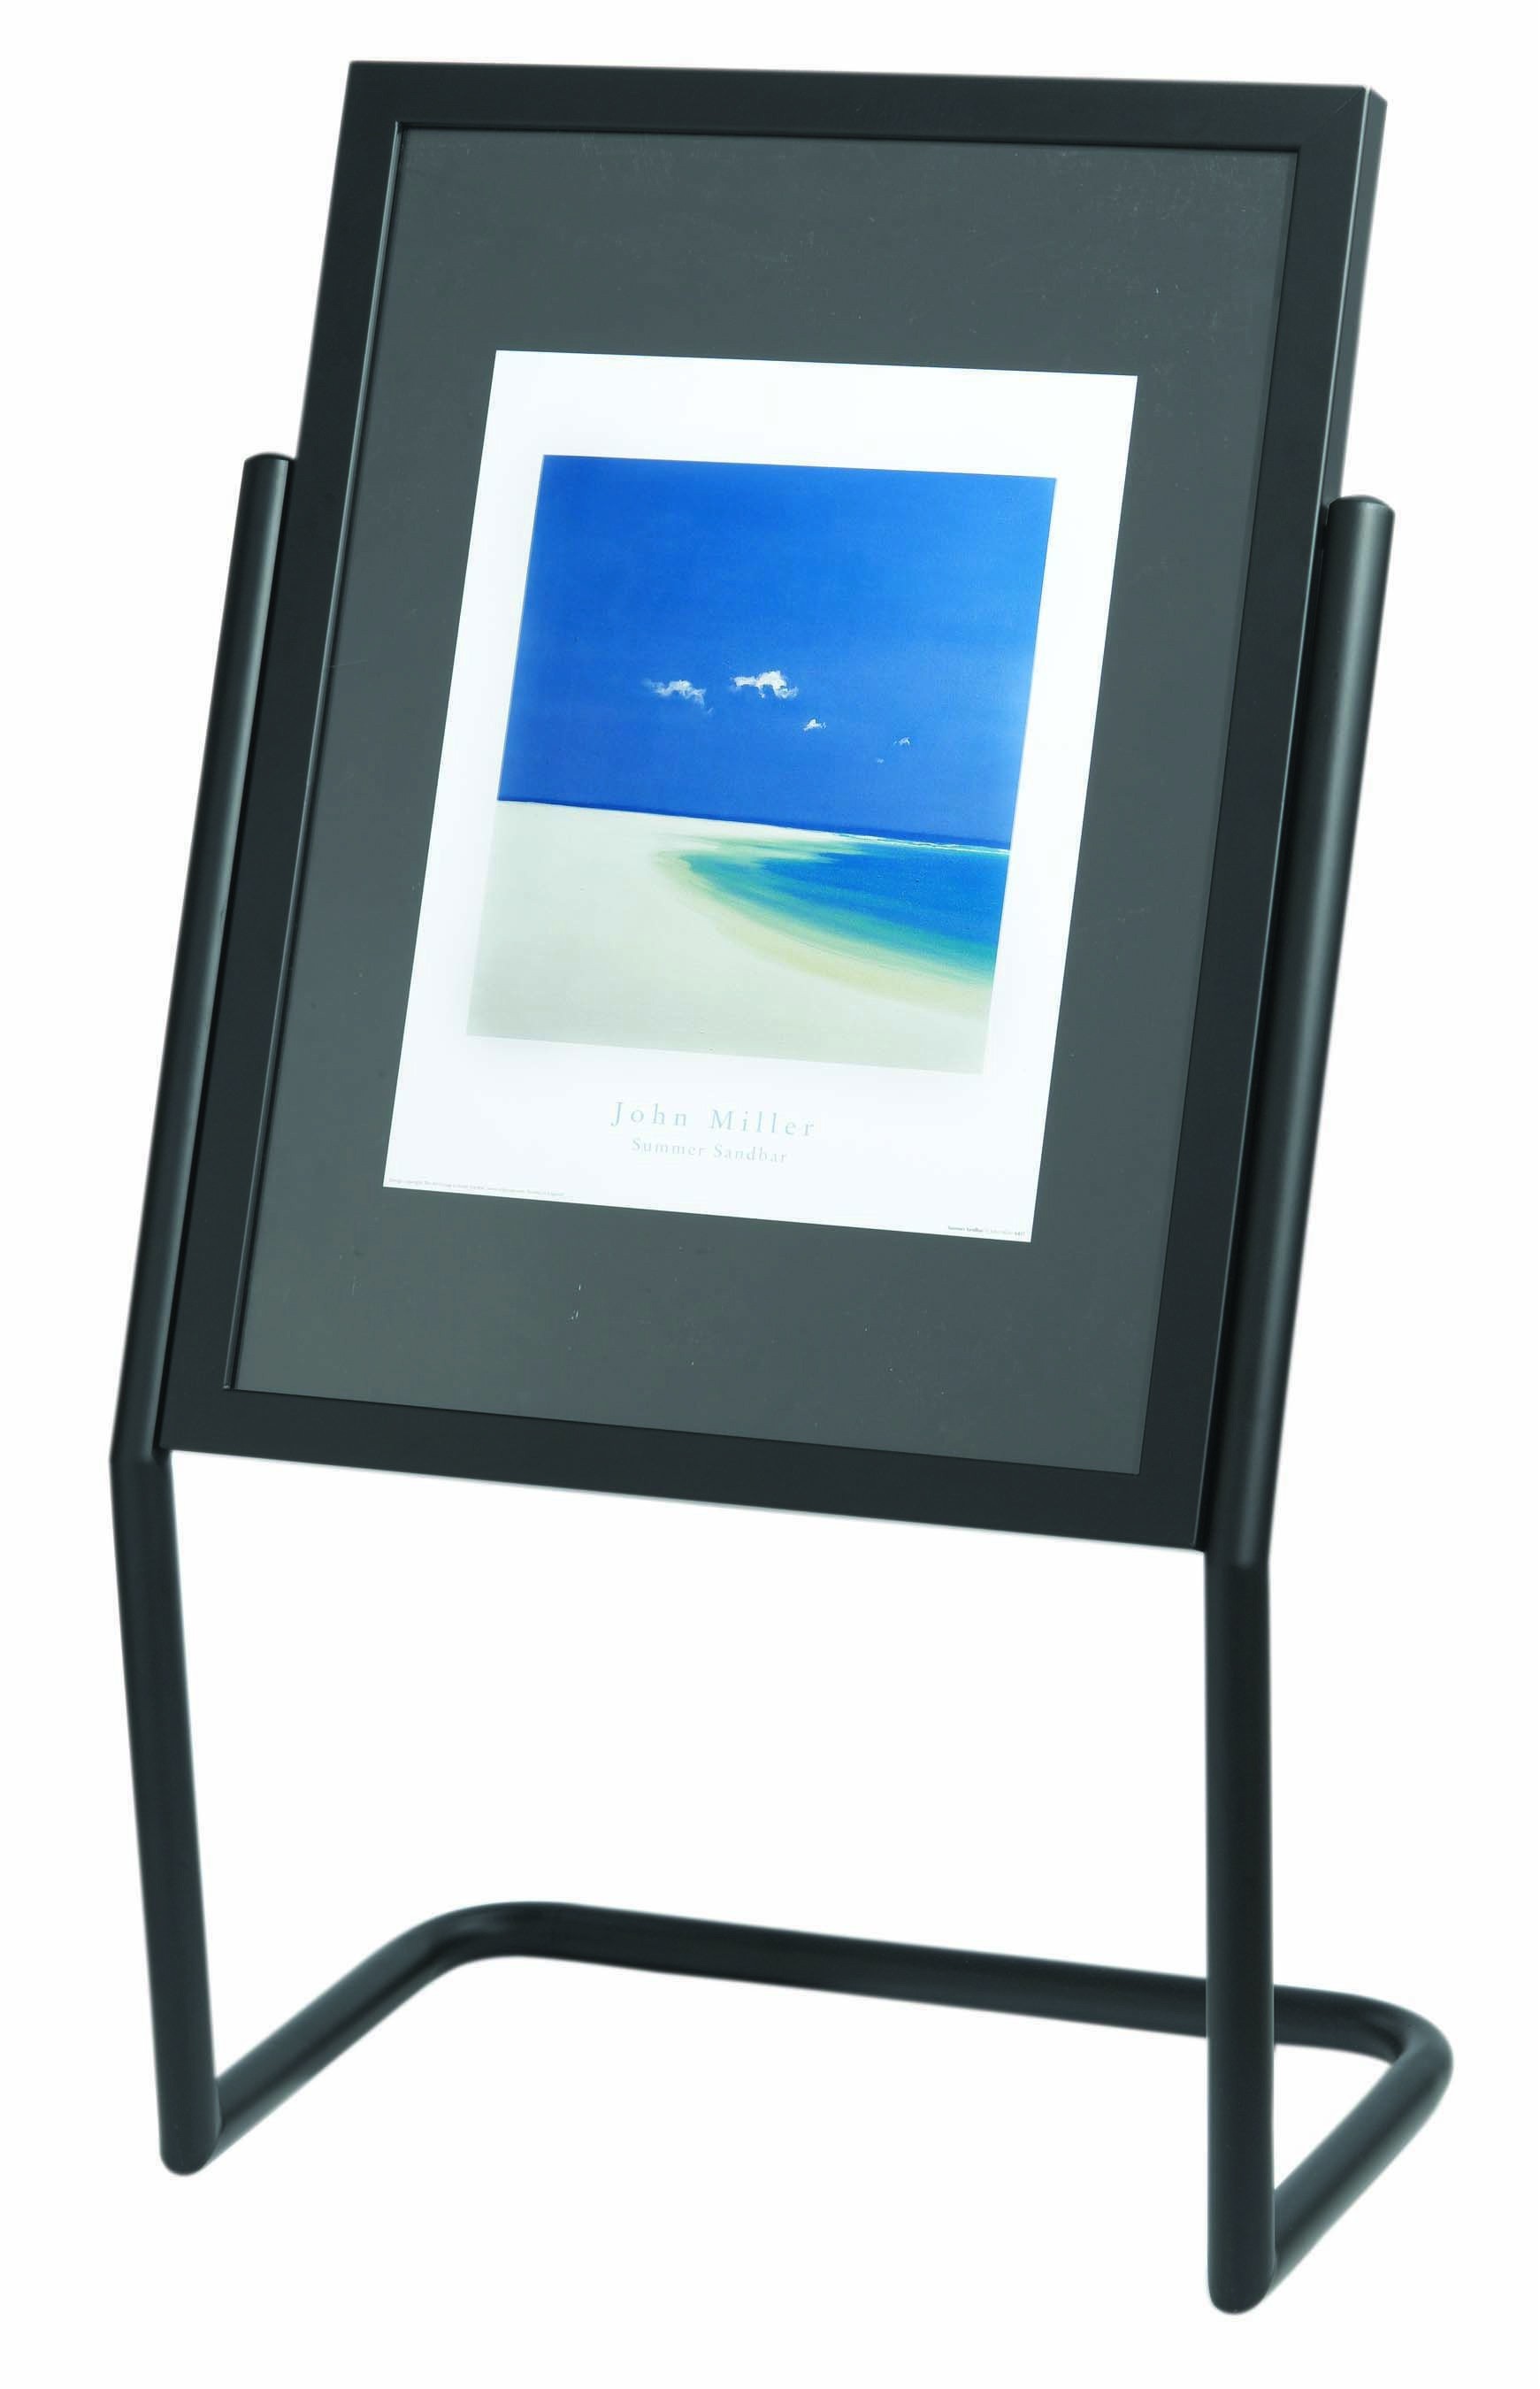 Aarco Products P-15BK Double Pedestal Free Standing Display/Broadcaster Black Frame with Menu Holder